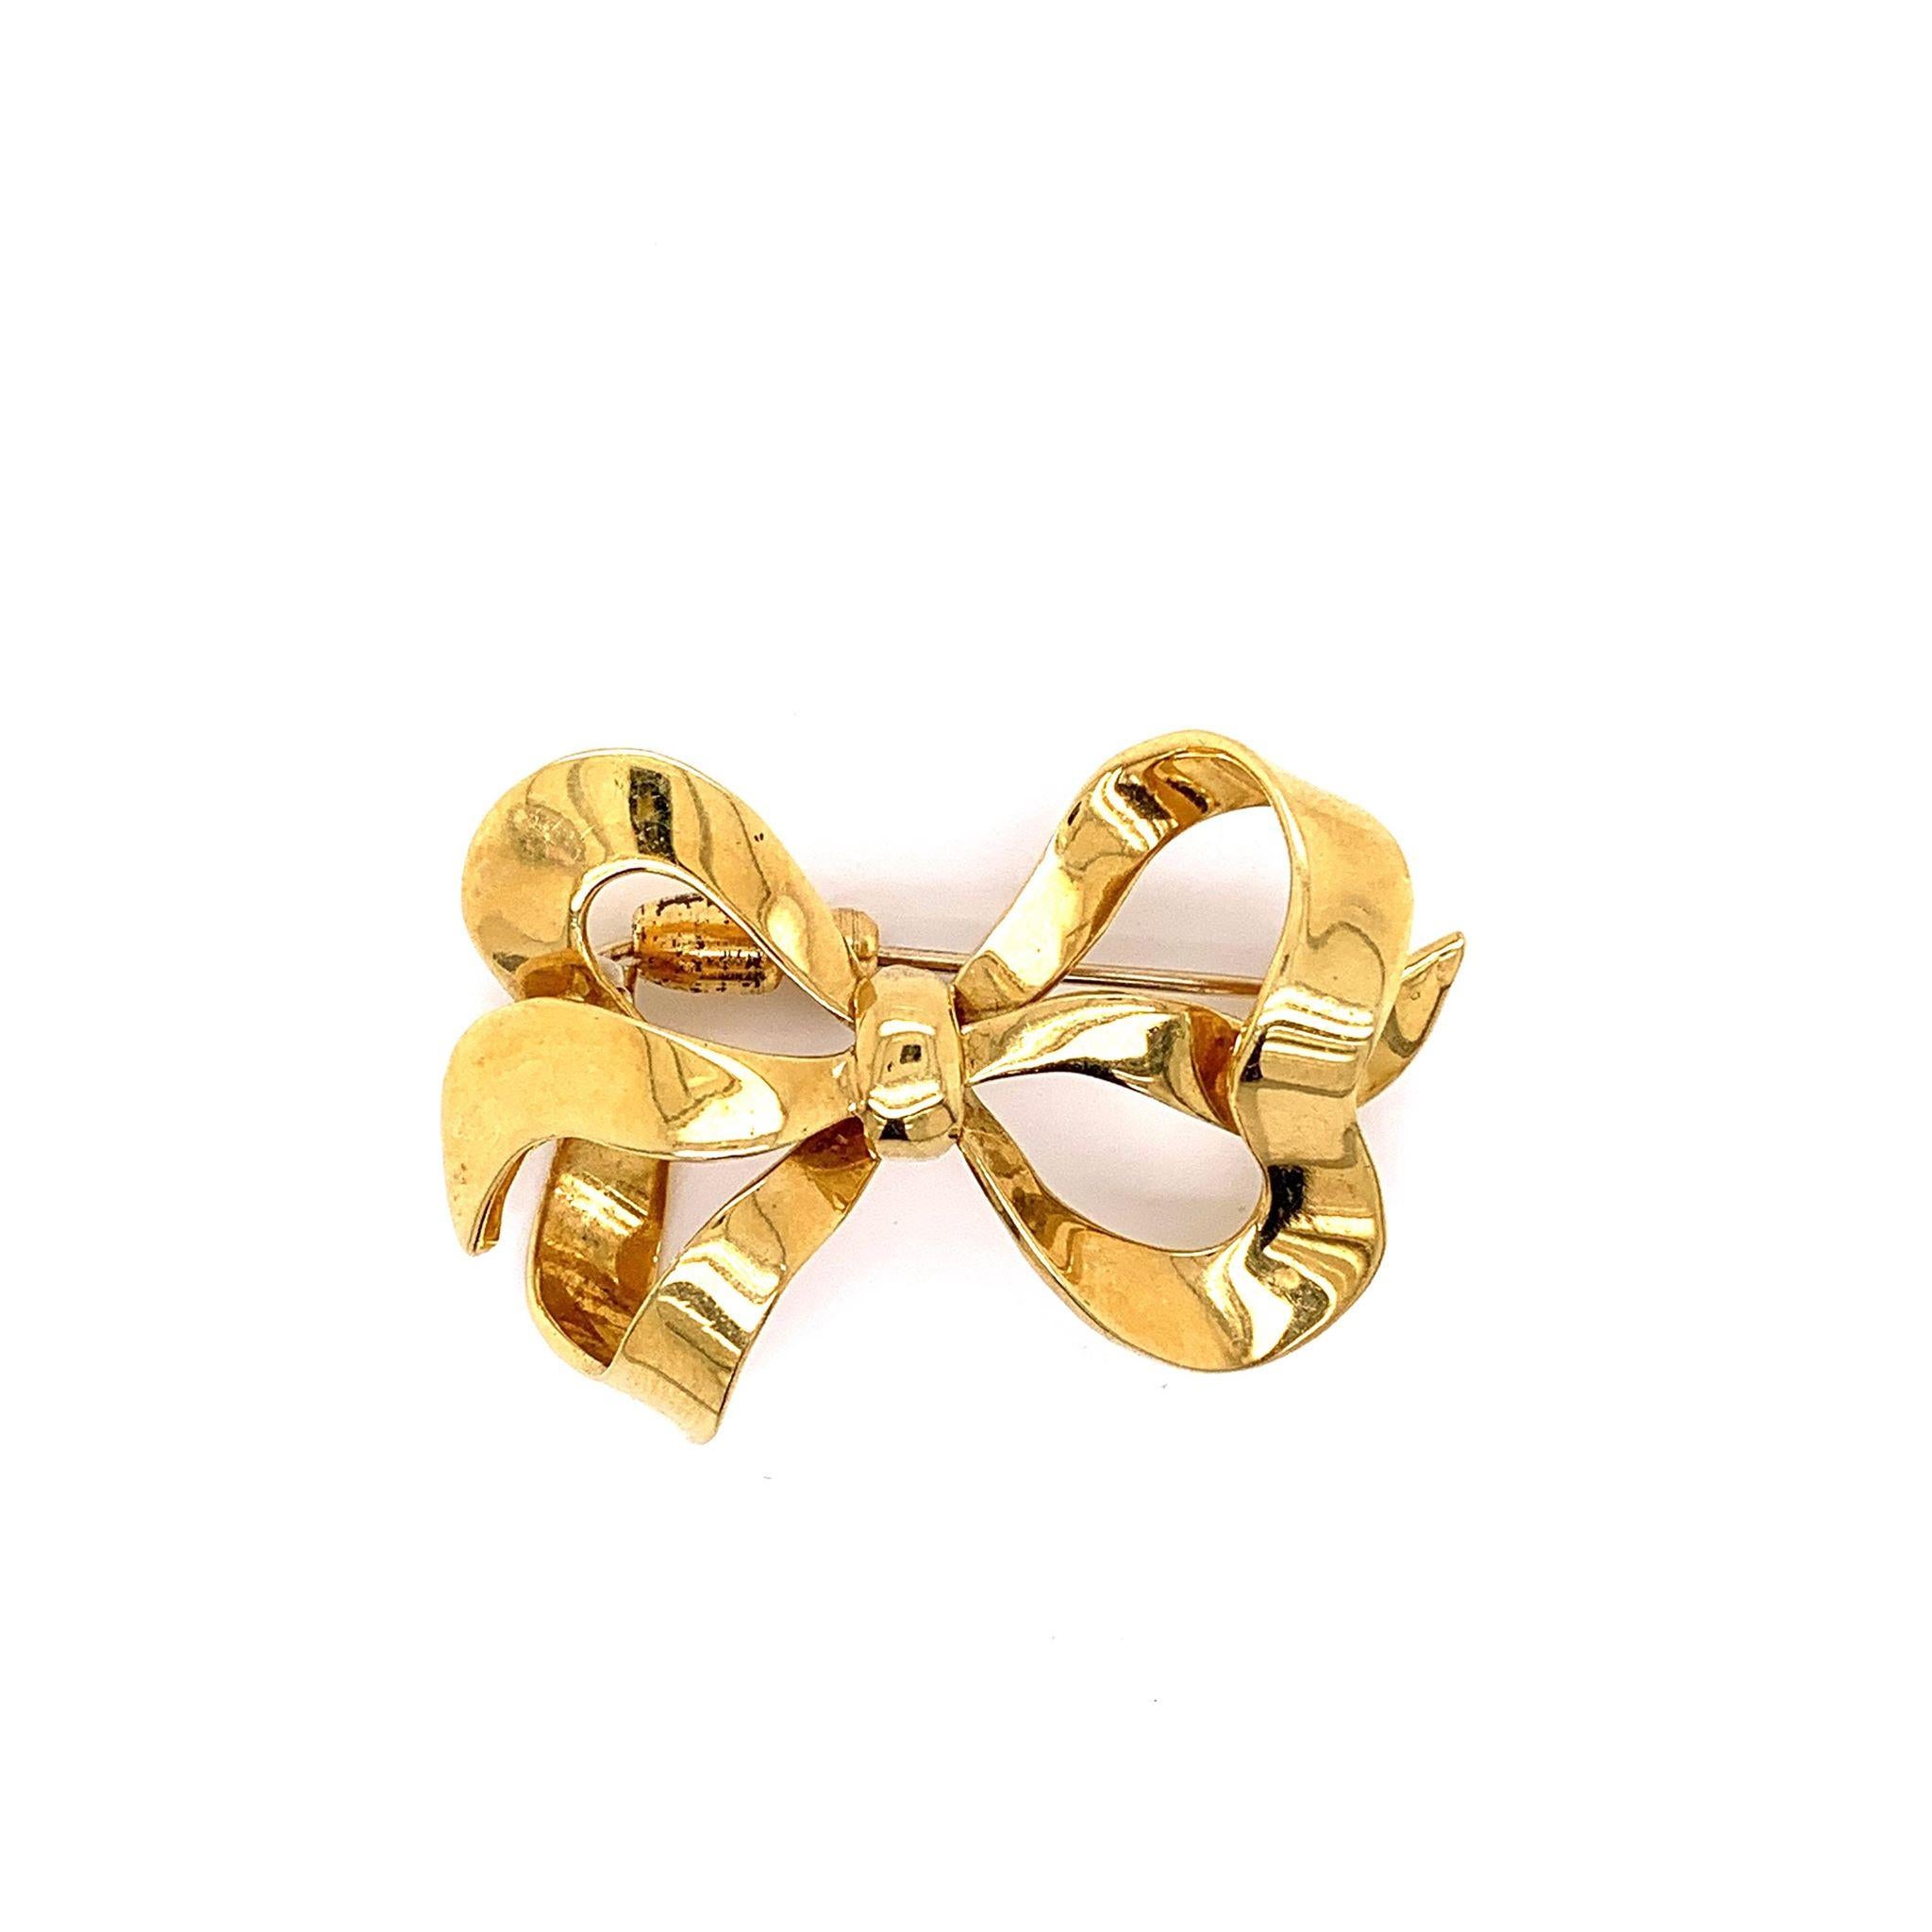 A lovely bow blowing in the wind. This Italian made piece is made in 18k yellow gold and has the style and workmanship one associates with Italian jewelry. A great addition to any outfit.

Dimensions: 1.50 x 1.10 inches